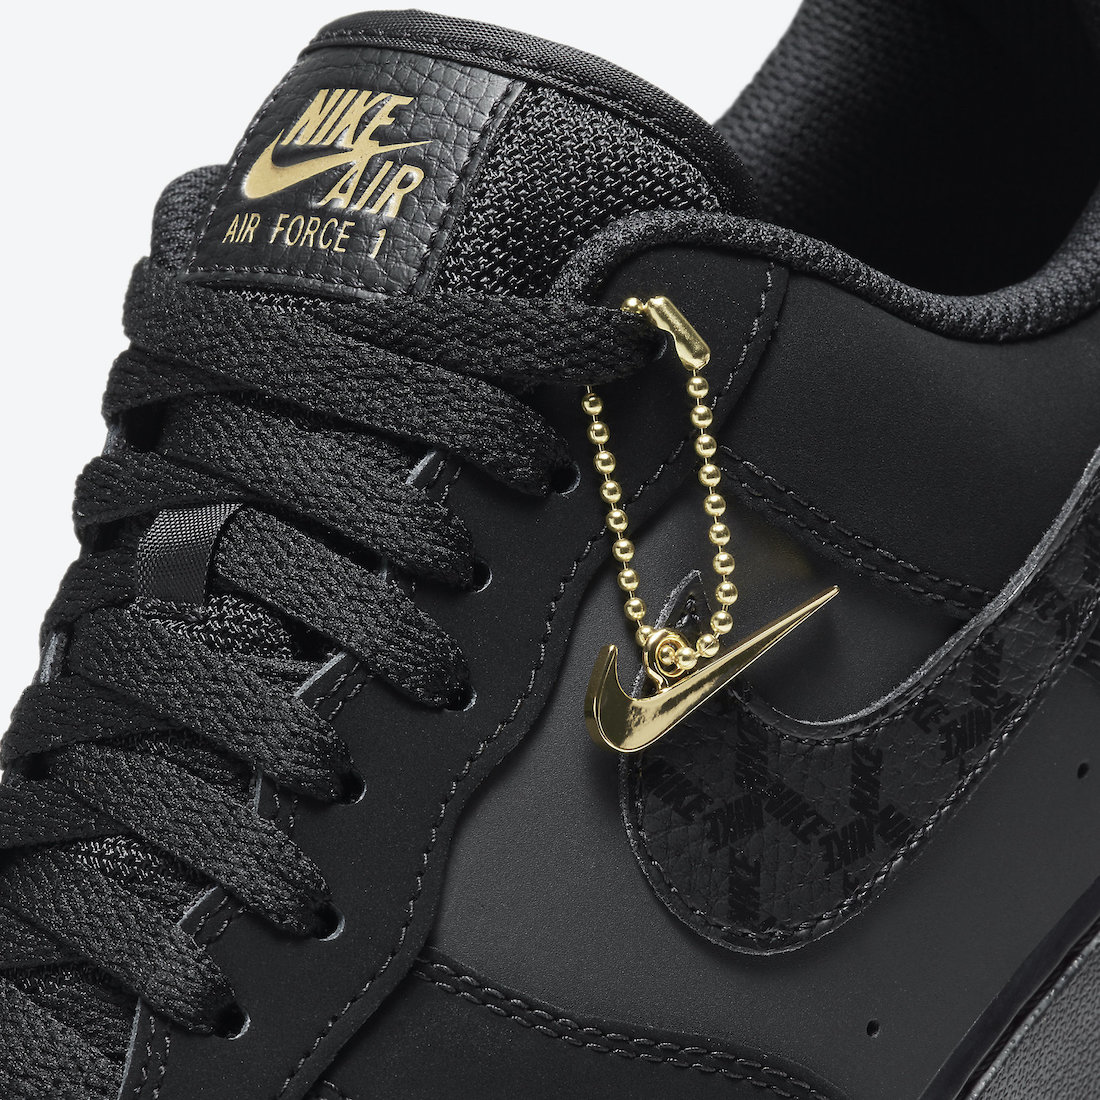 air force 1 high top black and gold